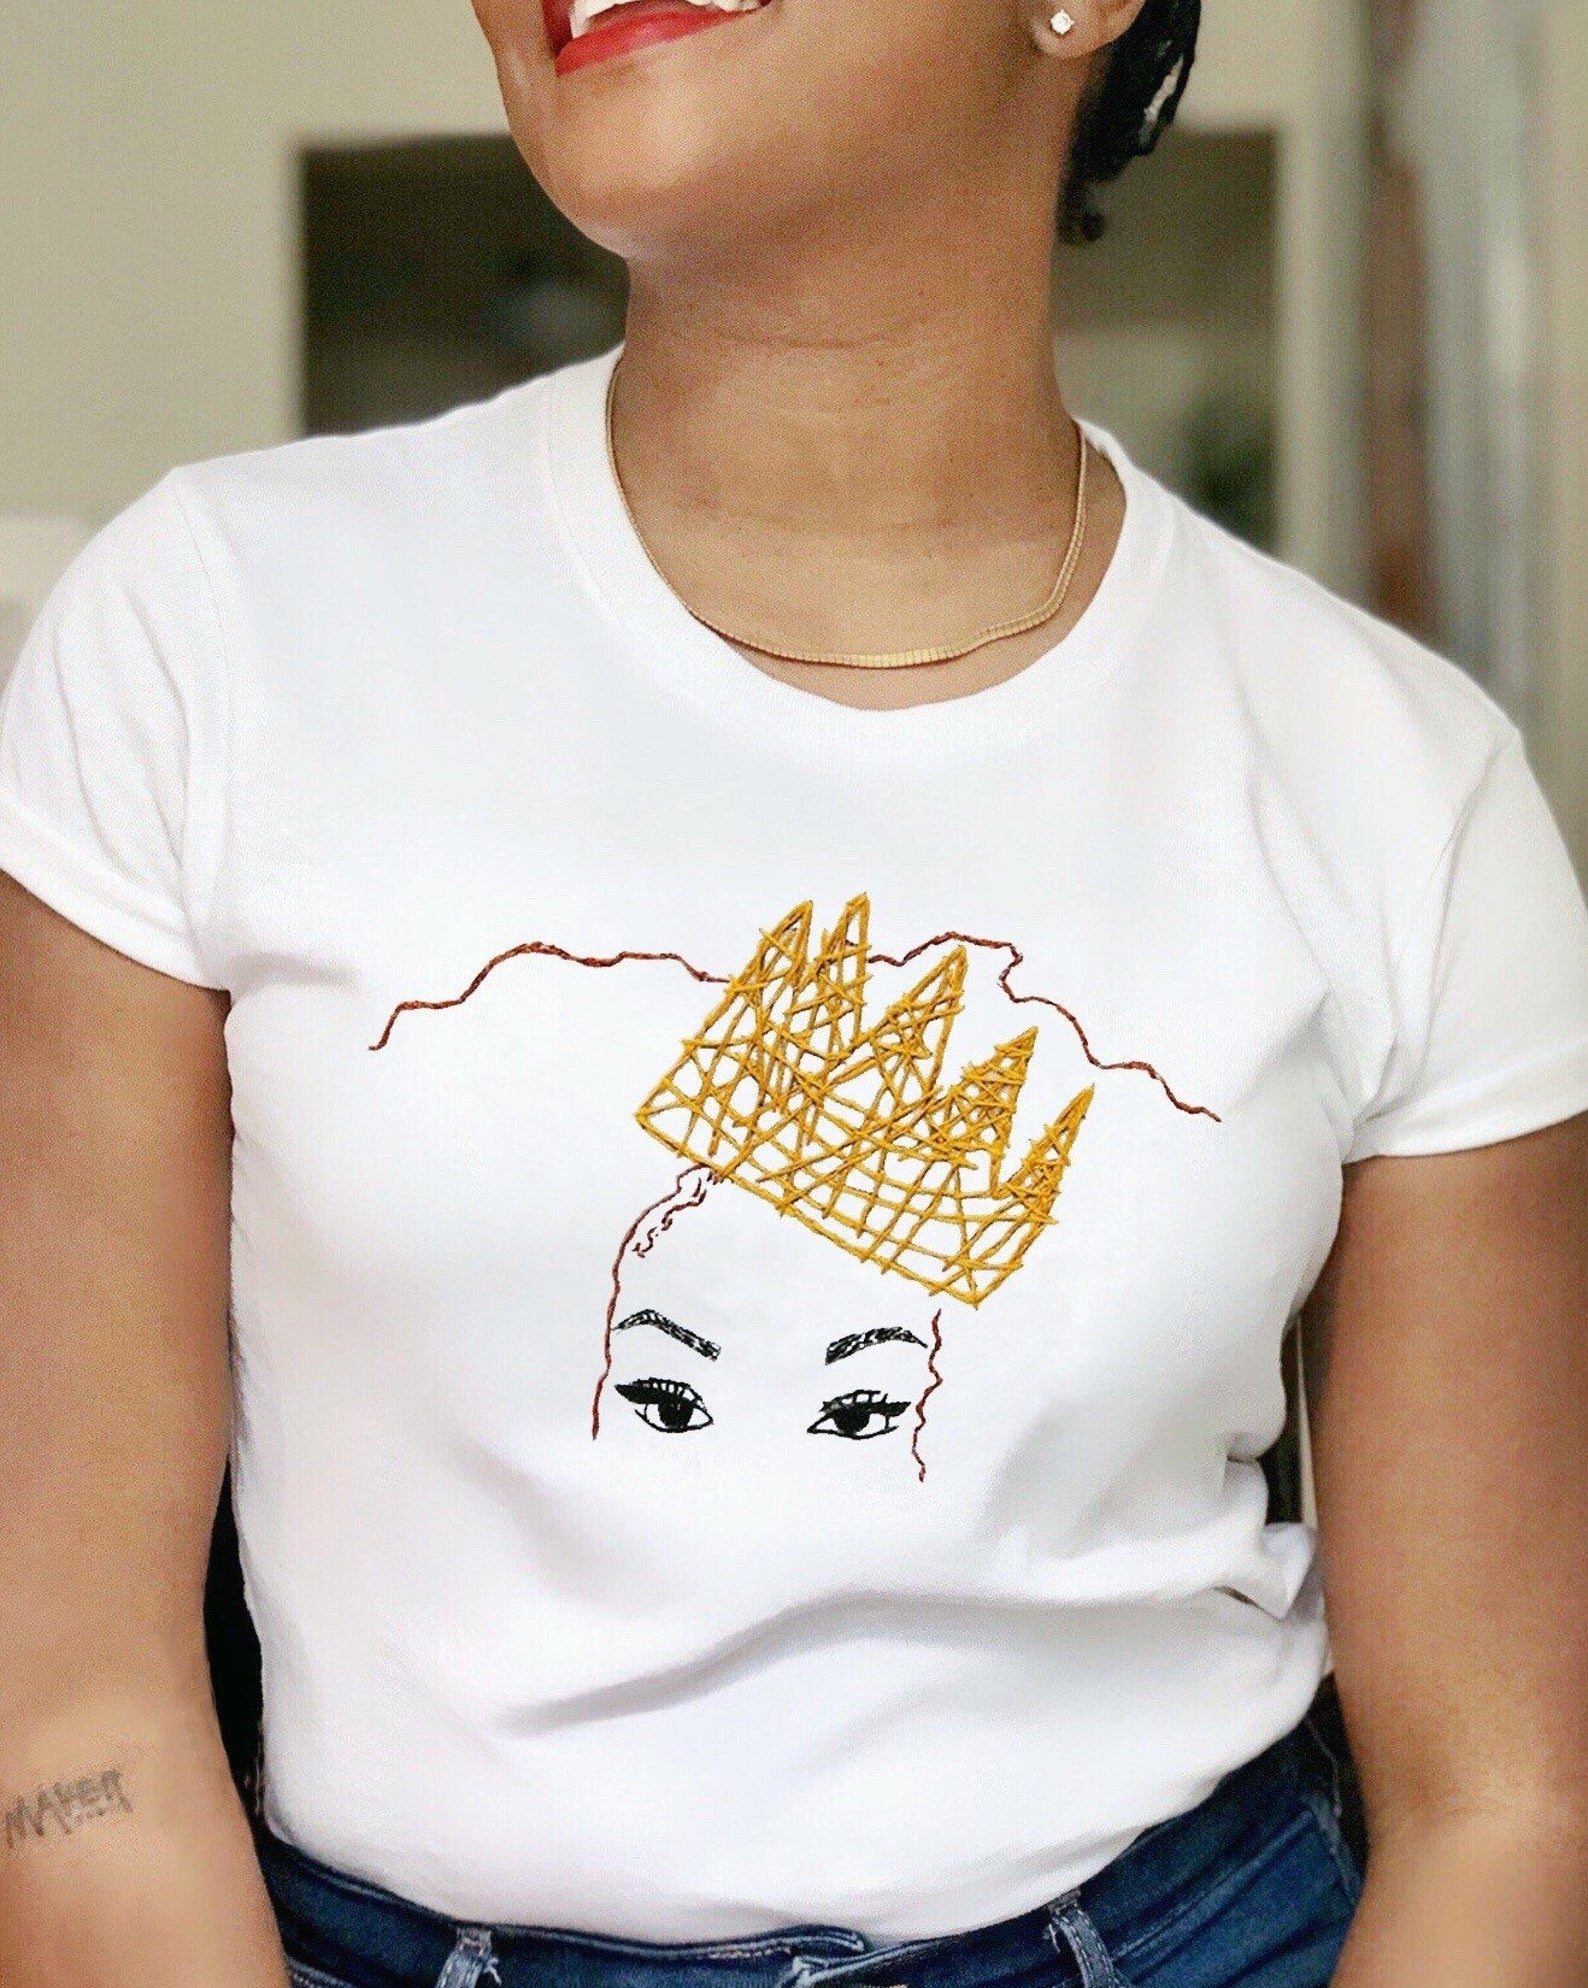 model wearing a t-shirt with a gold embroidered crown over a face just showing eyes and very fleeky eyebrows